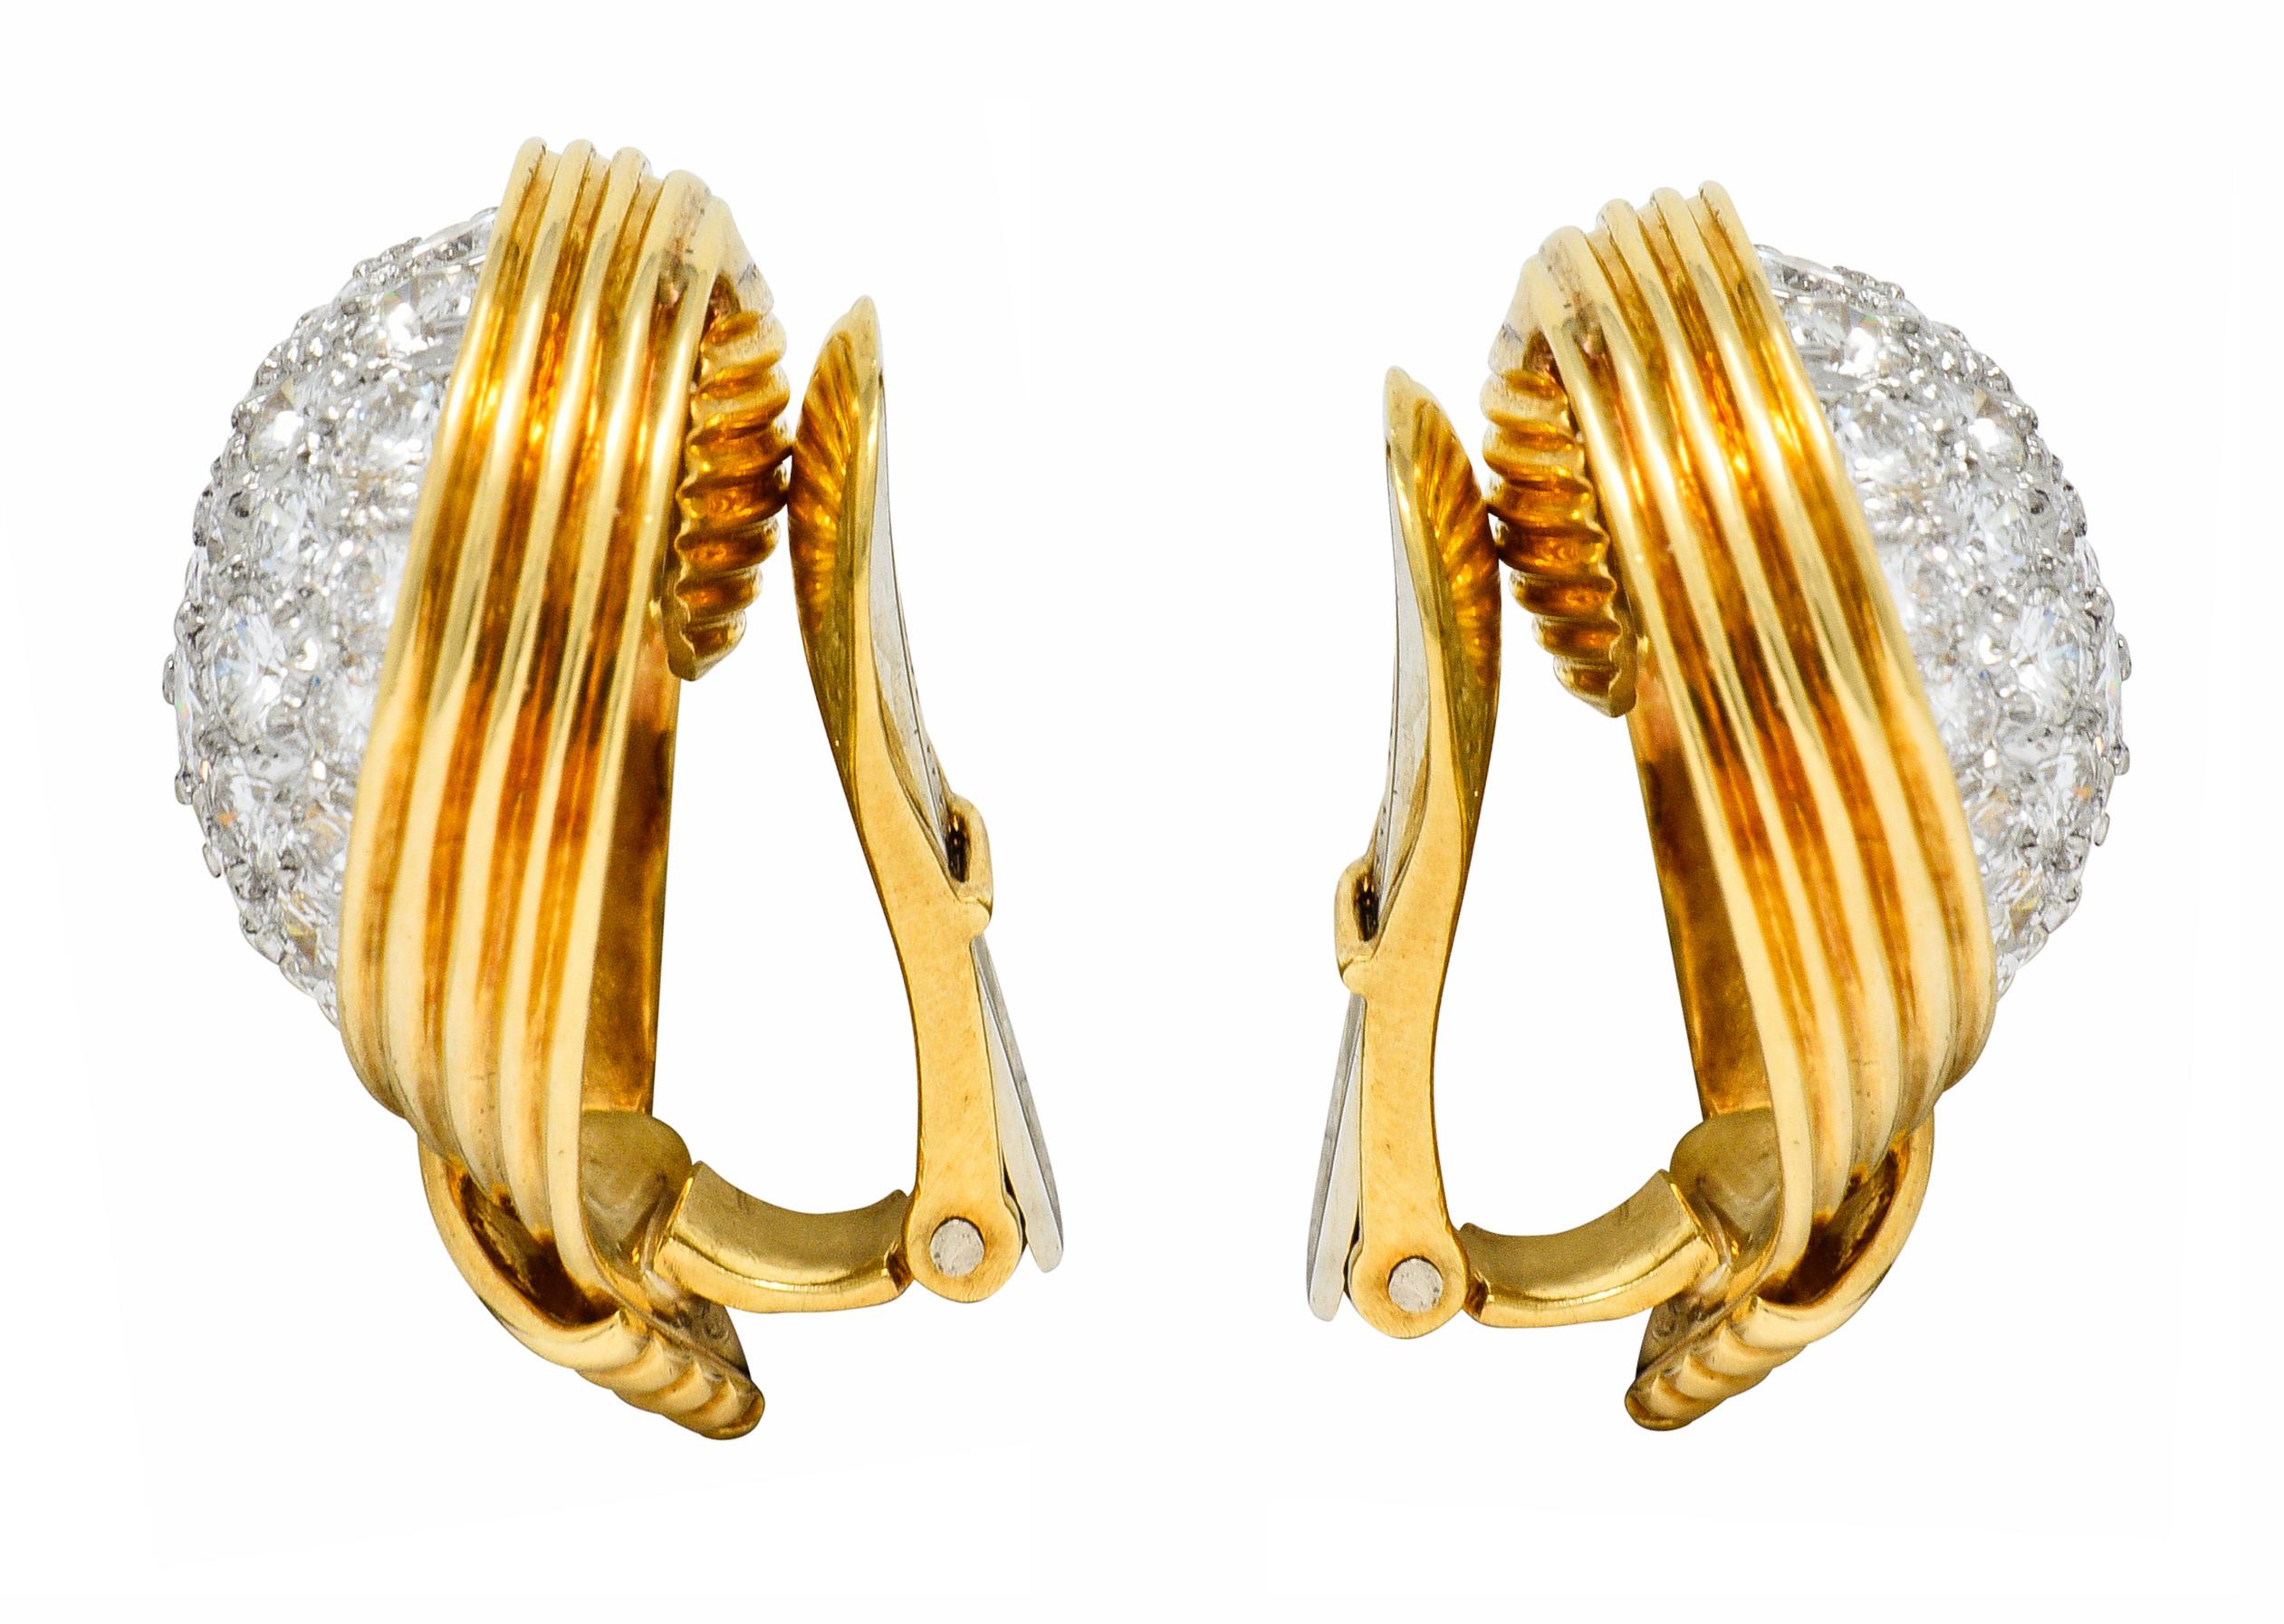 Ear-clip earrings center a platinum pavè field of round brilliant cut diamonds

Weighing in total approximately 3.50 carats with G to I color with VS clarity

With a deeply ridged polished gold surround

Completed by hinged omega backs

Signed Webb